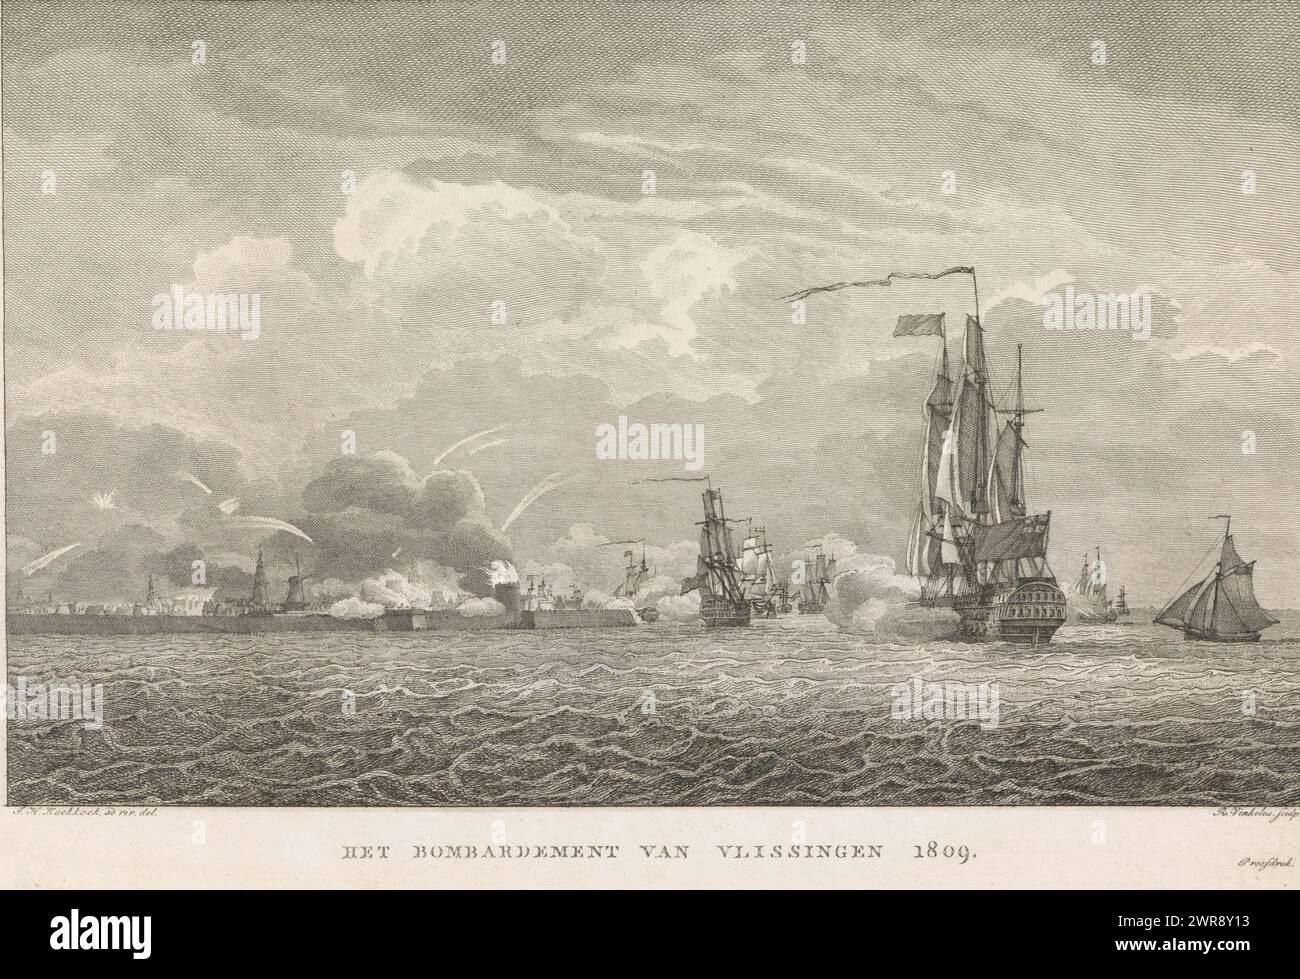 Bombardment of Vlissingen, 1809, The Bombardment of Vlissingen 1809 (title on object), The city of Vlissingen is shelled from the sea by British ships, August 13, 1809. See also the pendant., print maker: Reinier Vinkeles (I), after drawing by: Johannes Hermanus Koekkoek, print maker: Netherlands, after drawing by: Flushing, 1809 - 1810, paper, etching, engraving, height 184 mm × width 263 mm, print Stock Photo